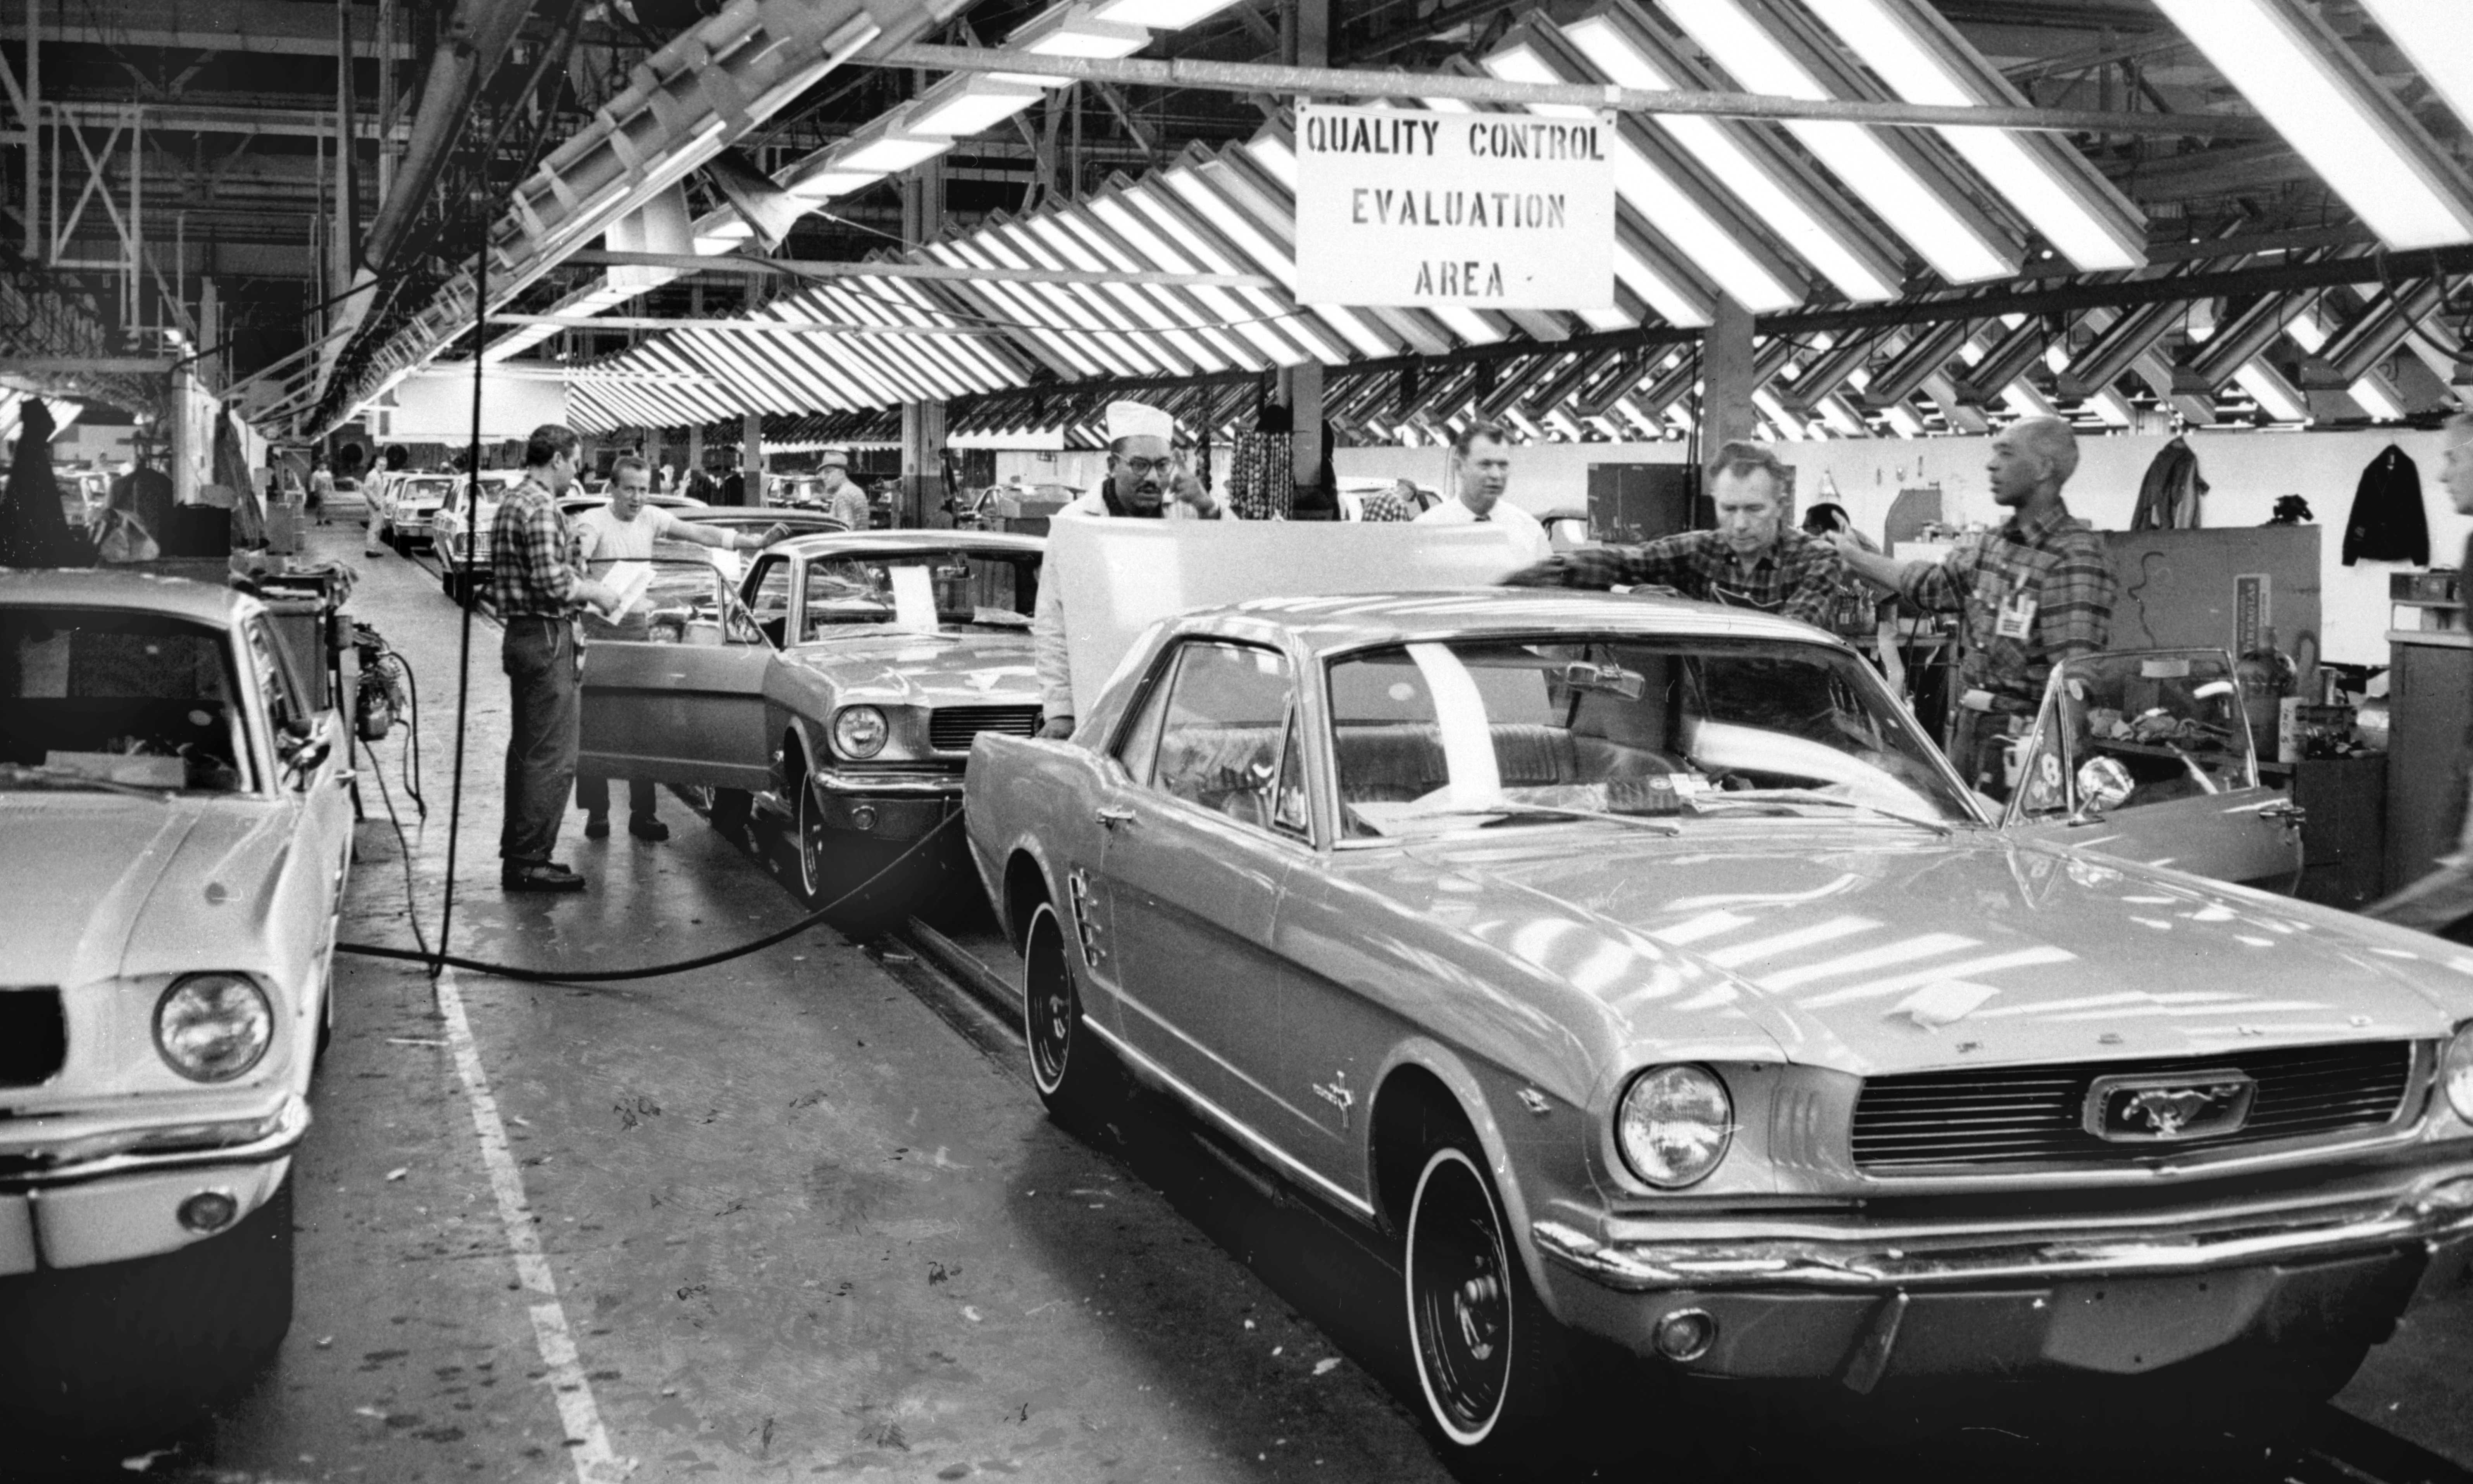 Rouge plant, Ford celebrates 100 years of production at the Rouge, ClassicCars.com Journal